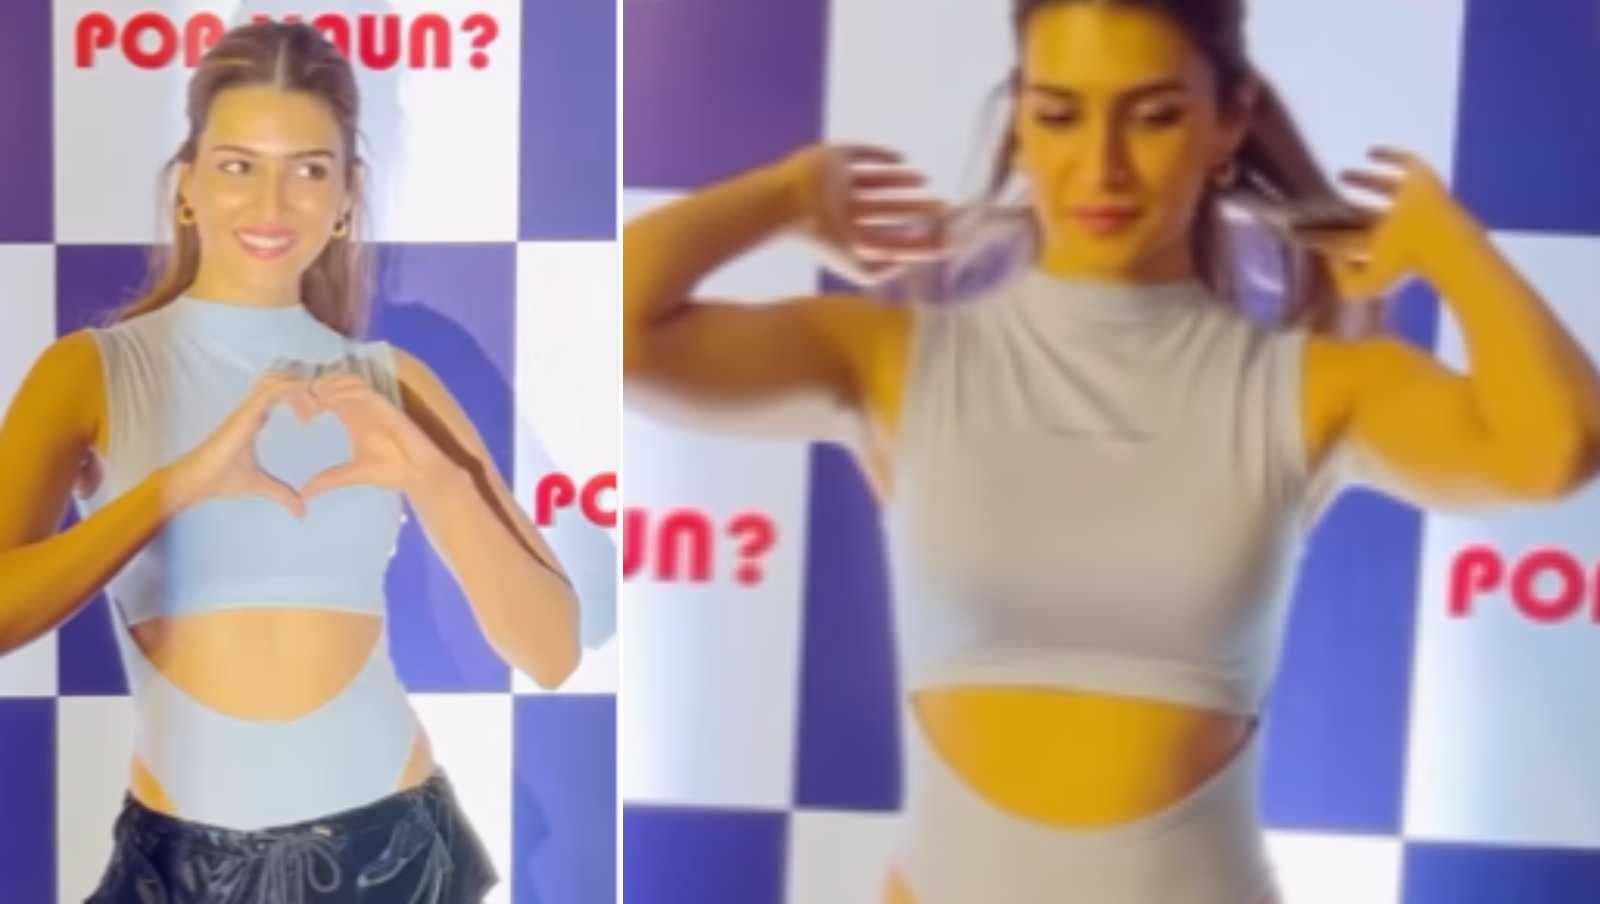 'Urfi Javed ka asar' : Kriti Sanon's latest swimsuit-inspired outfit at the Pop Kaun screening gets trolled by netizens